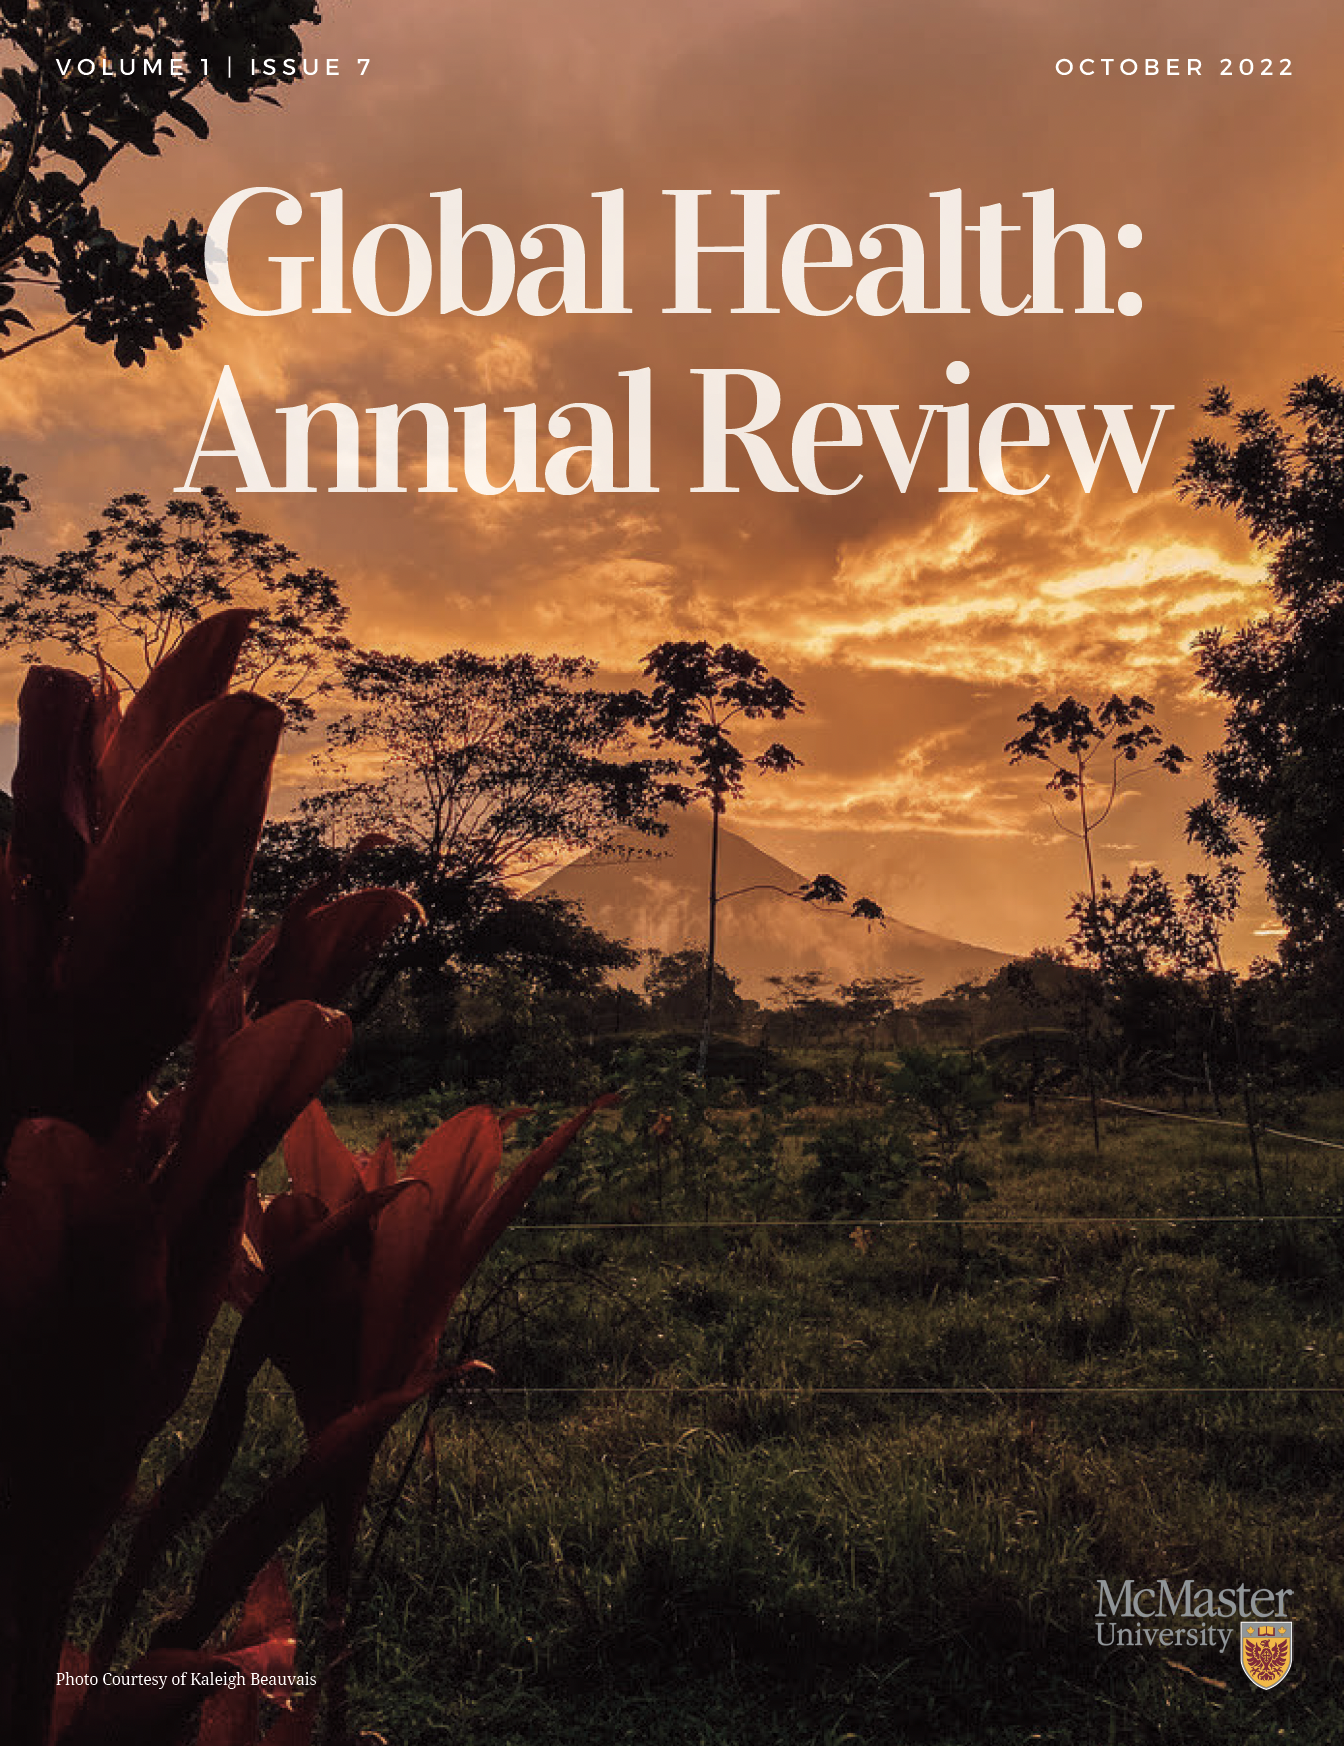 					View Vol. 1 No. 7 (2022): Global Health: Annual Review Issue 7
				